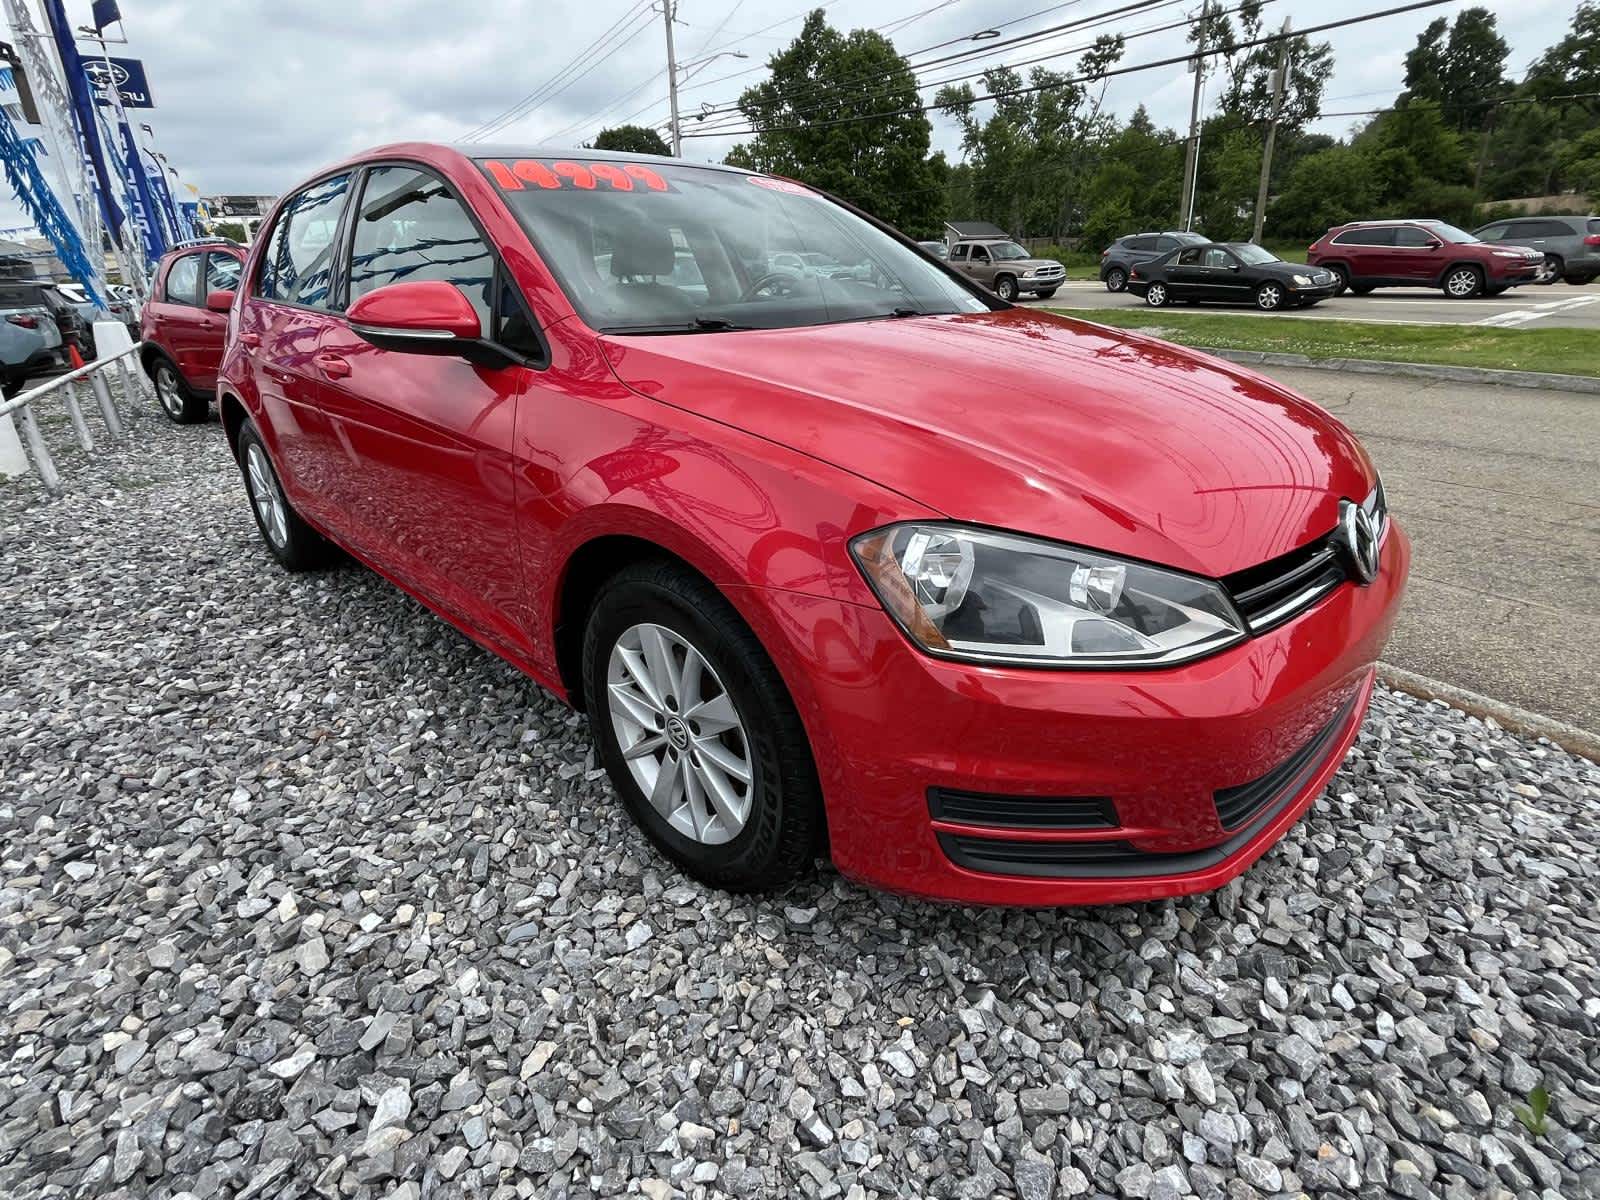 Used 2015 Volkswagen Golf TSI S with VIN 3VW217AU9FM018113 for sale in Knoxville, TN